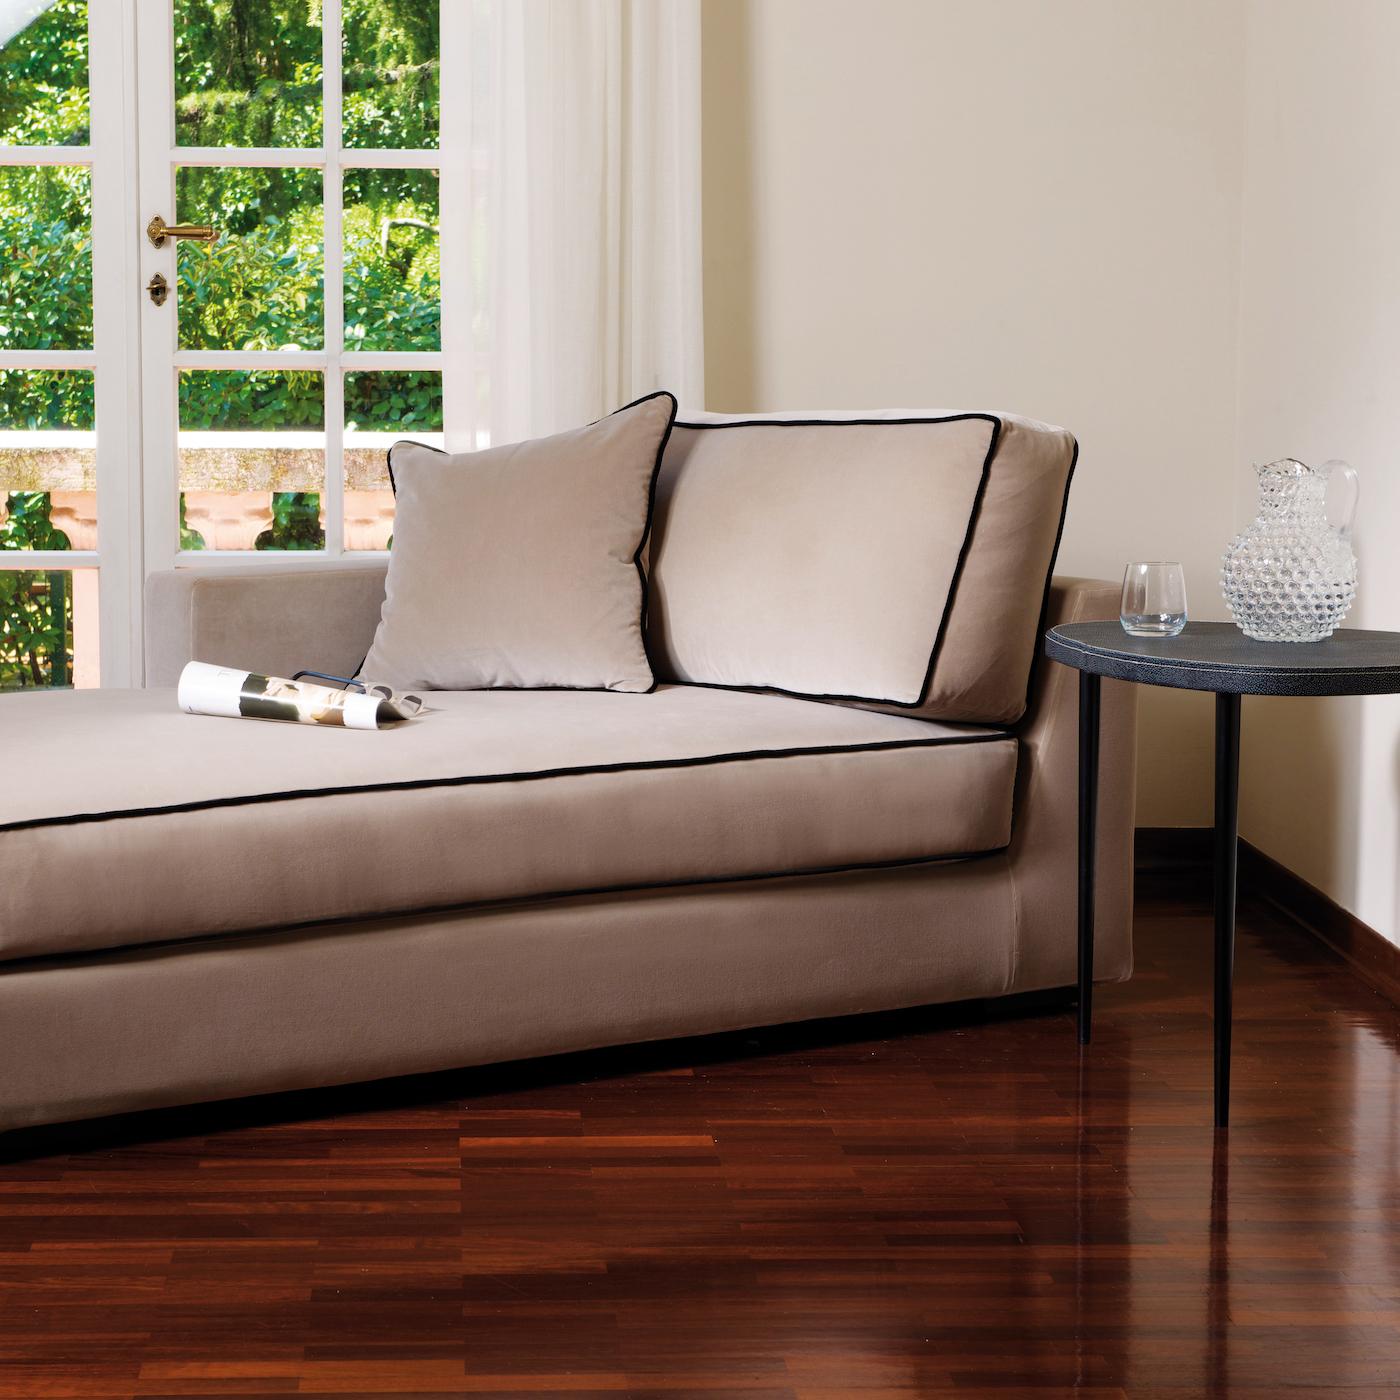 A superb addition to a contemporary or classic home, this chaise longue is a celebration of sophisticated lounging. The wooden structure is visible in the lacquered feet that support the plush base padded with a combination of goose down and